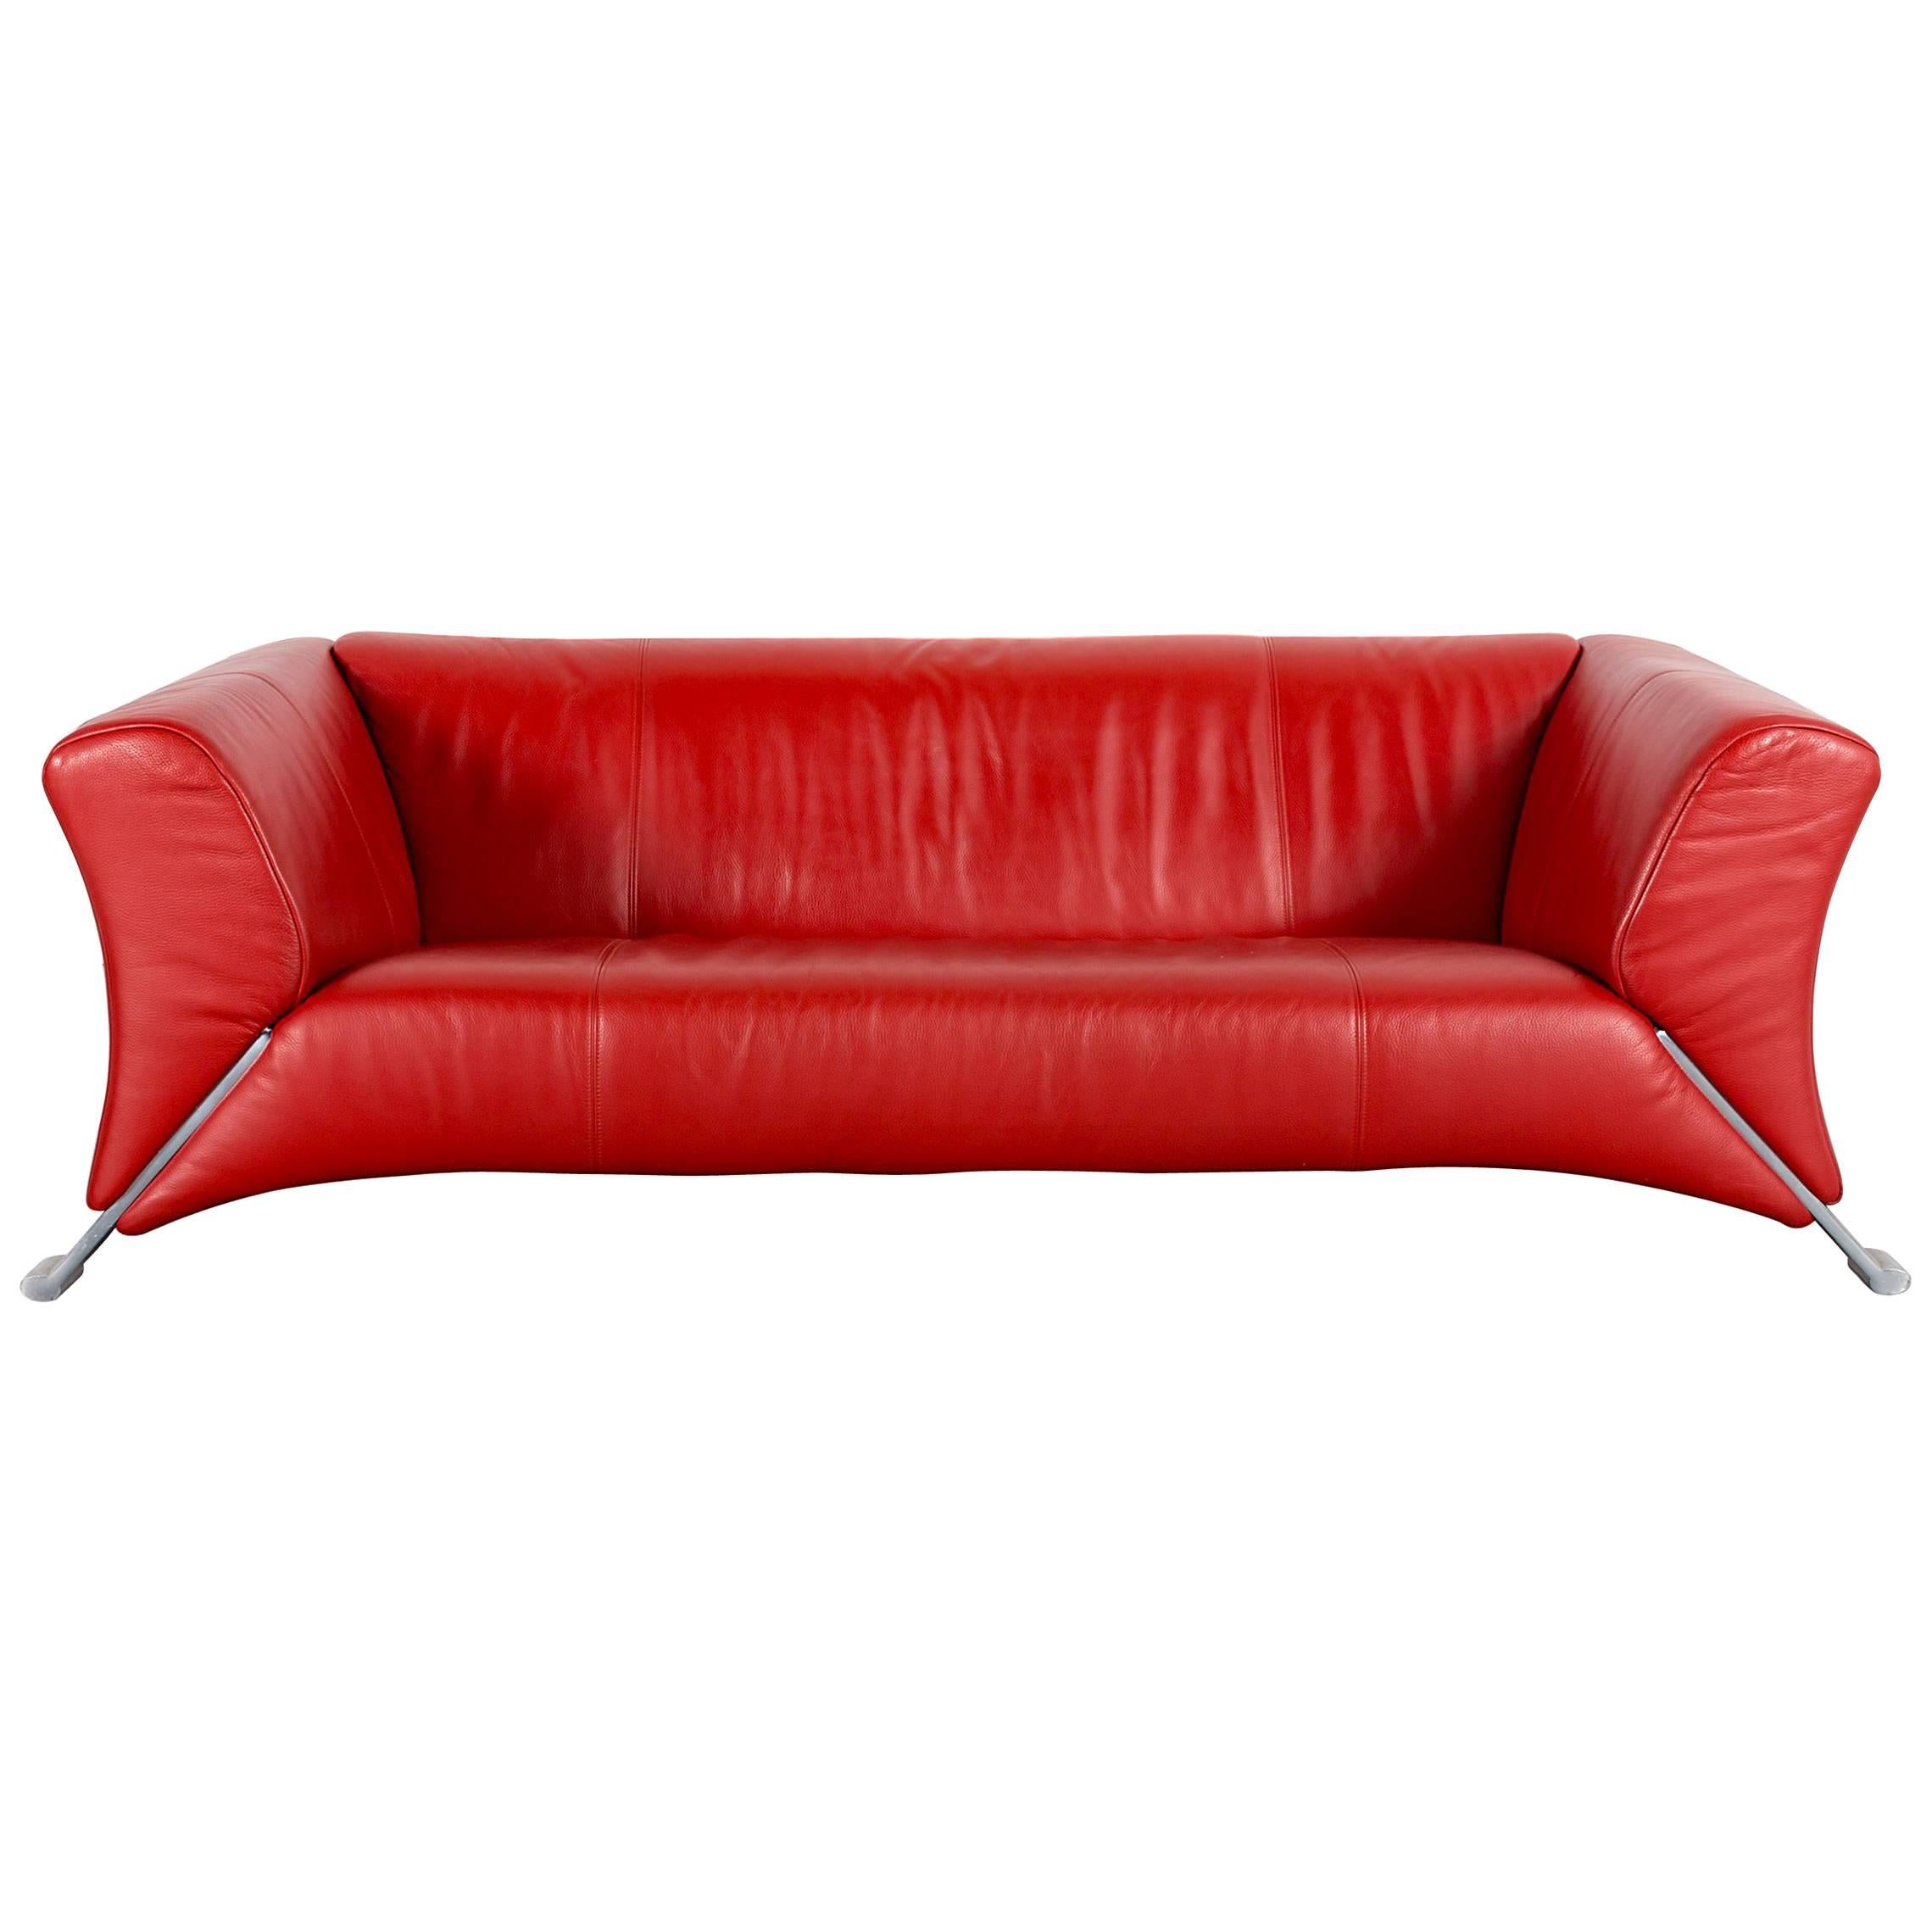 Rolf Benz 322 Designer Sofa Red Three-Seat Leather Modern Couch Metal Feet